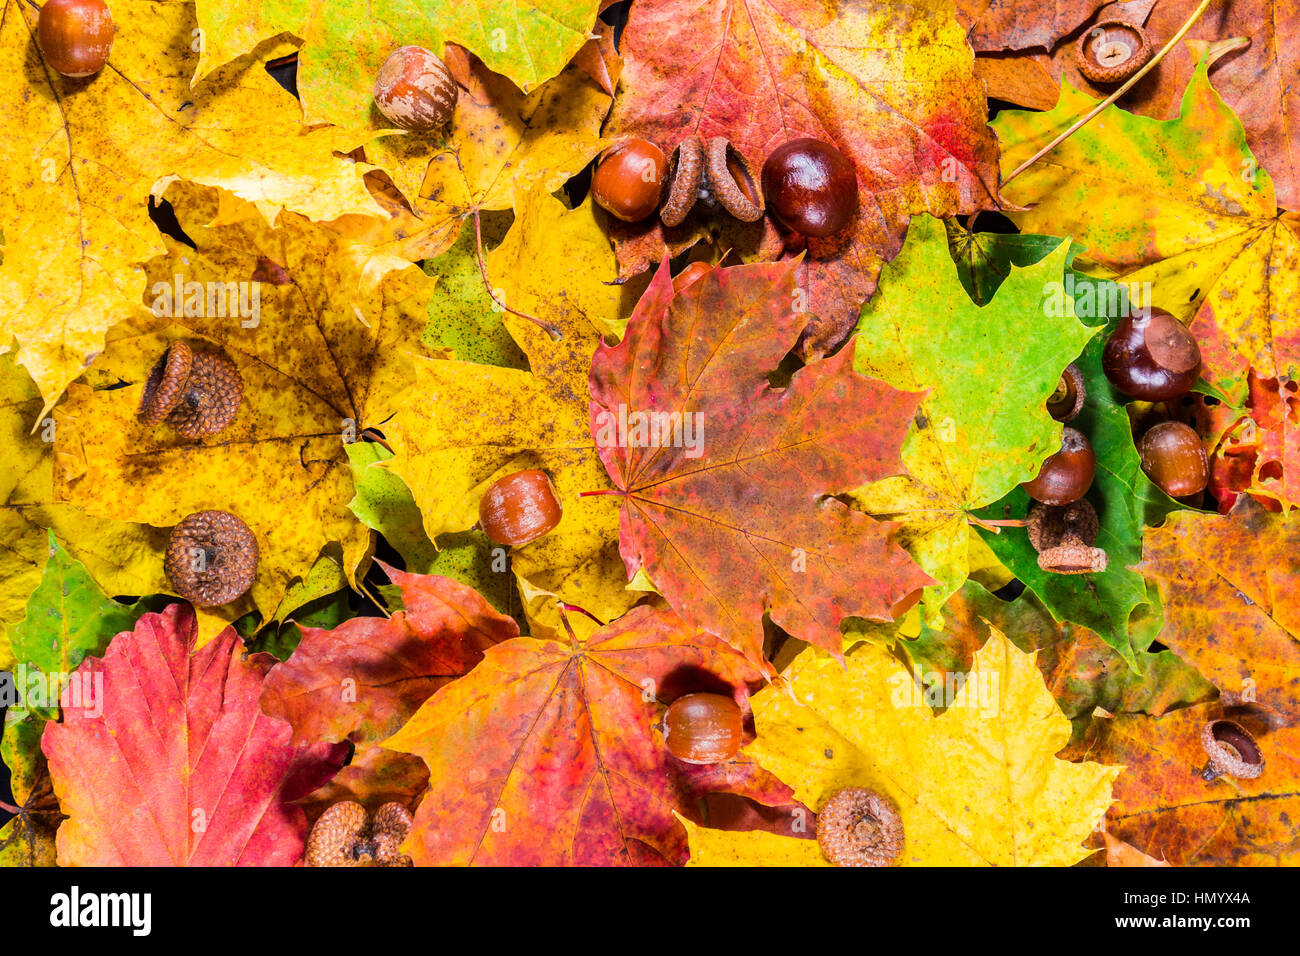 Colorful and bright background made of fallen autumn leaves Stock Photo